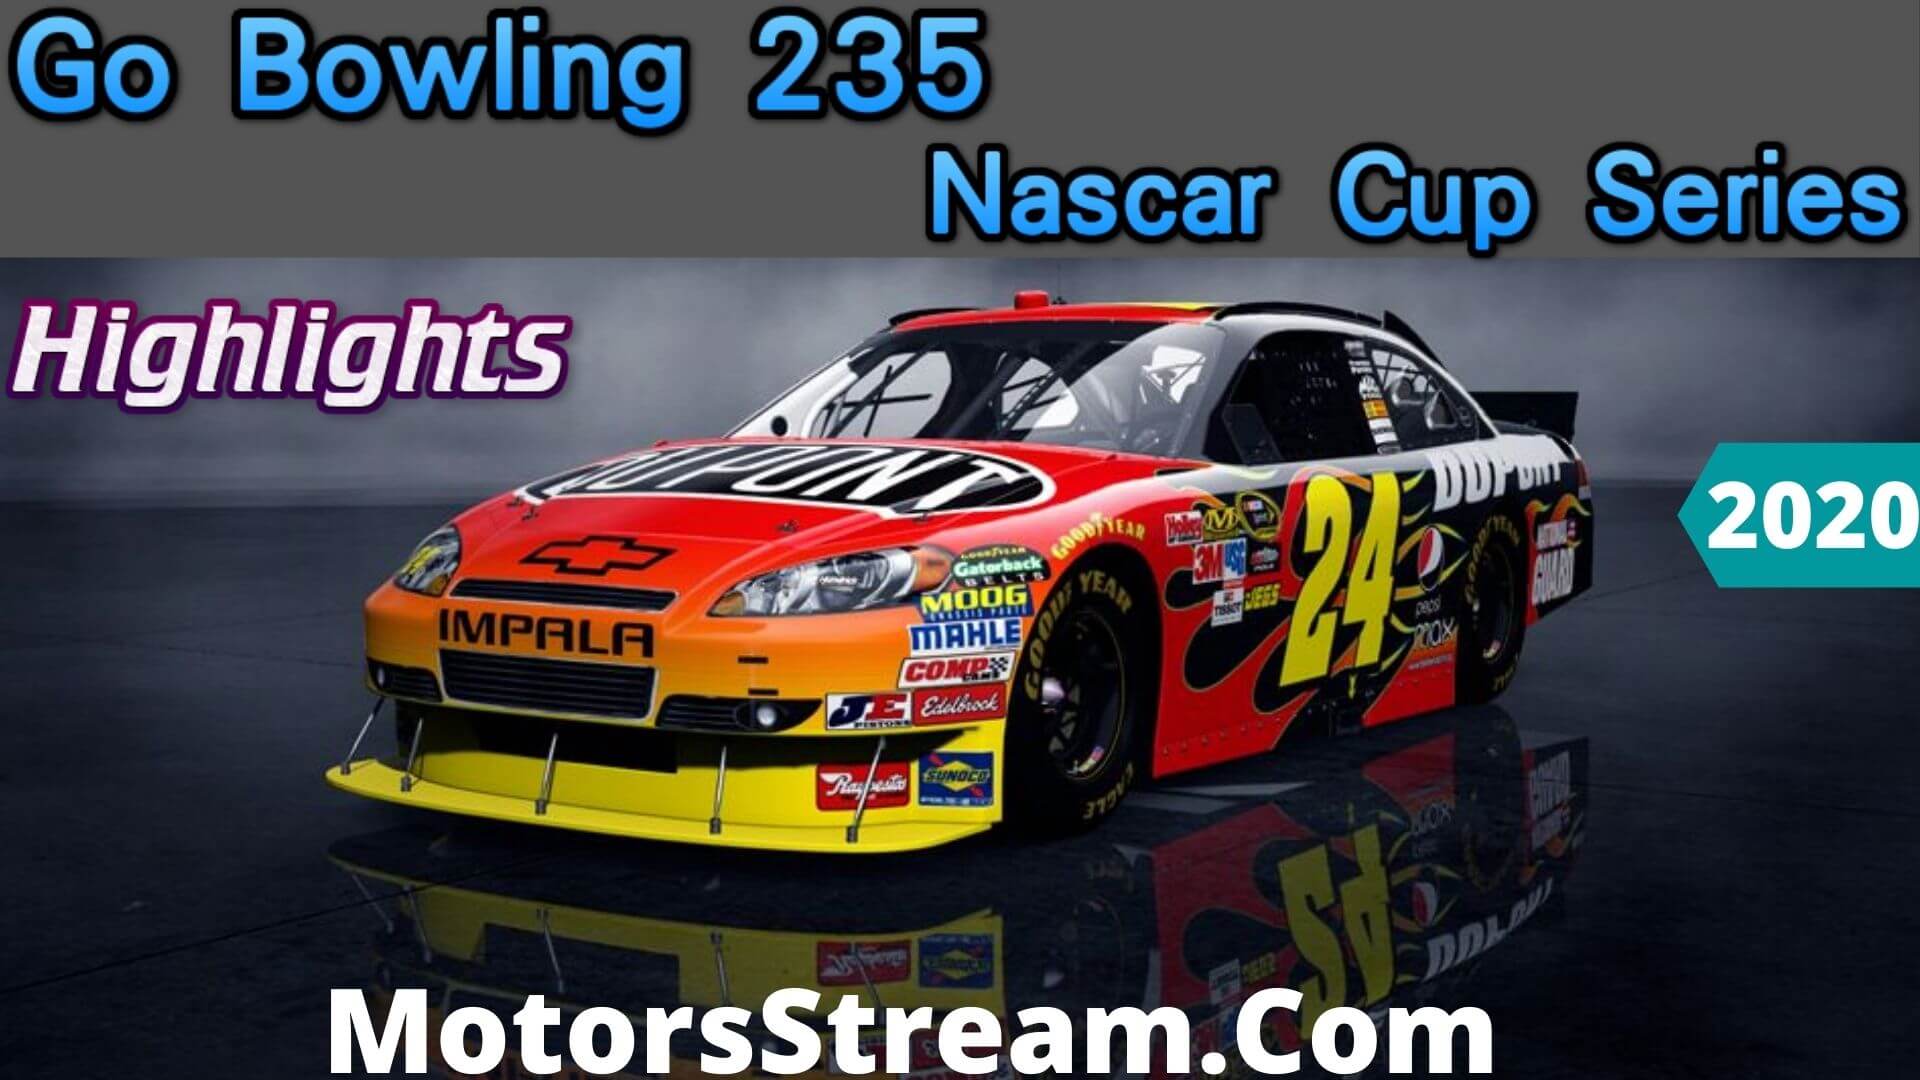 Go Bowling 235 Highlights 2020 Nascar Cup Series